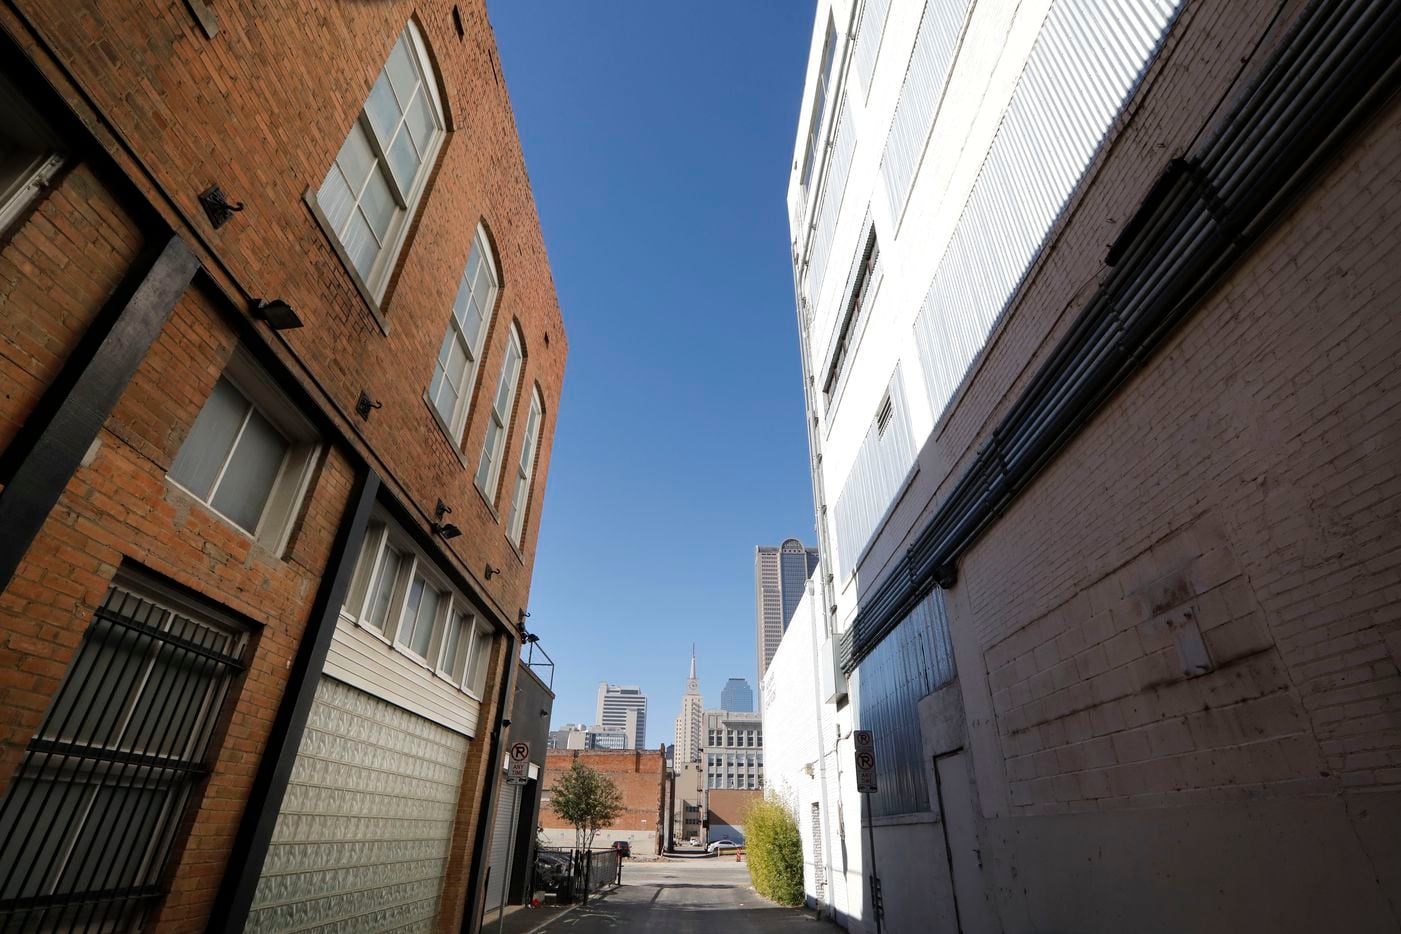 The Munger Cadillac building, left, and the building on the right, is part of the twenty-four buildings Todd Interests is buying in downtown Dallas.